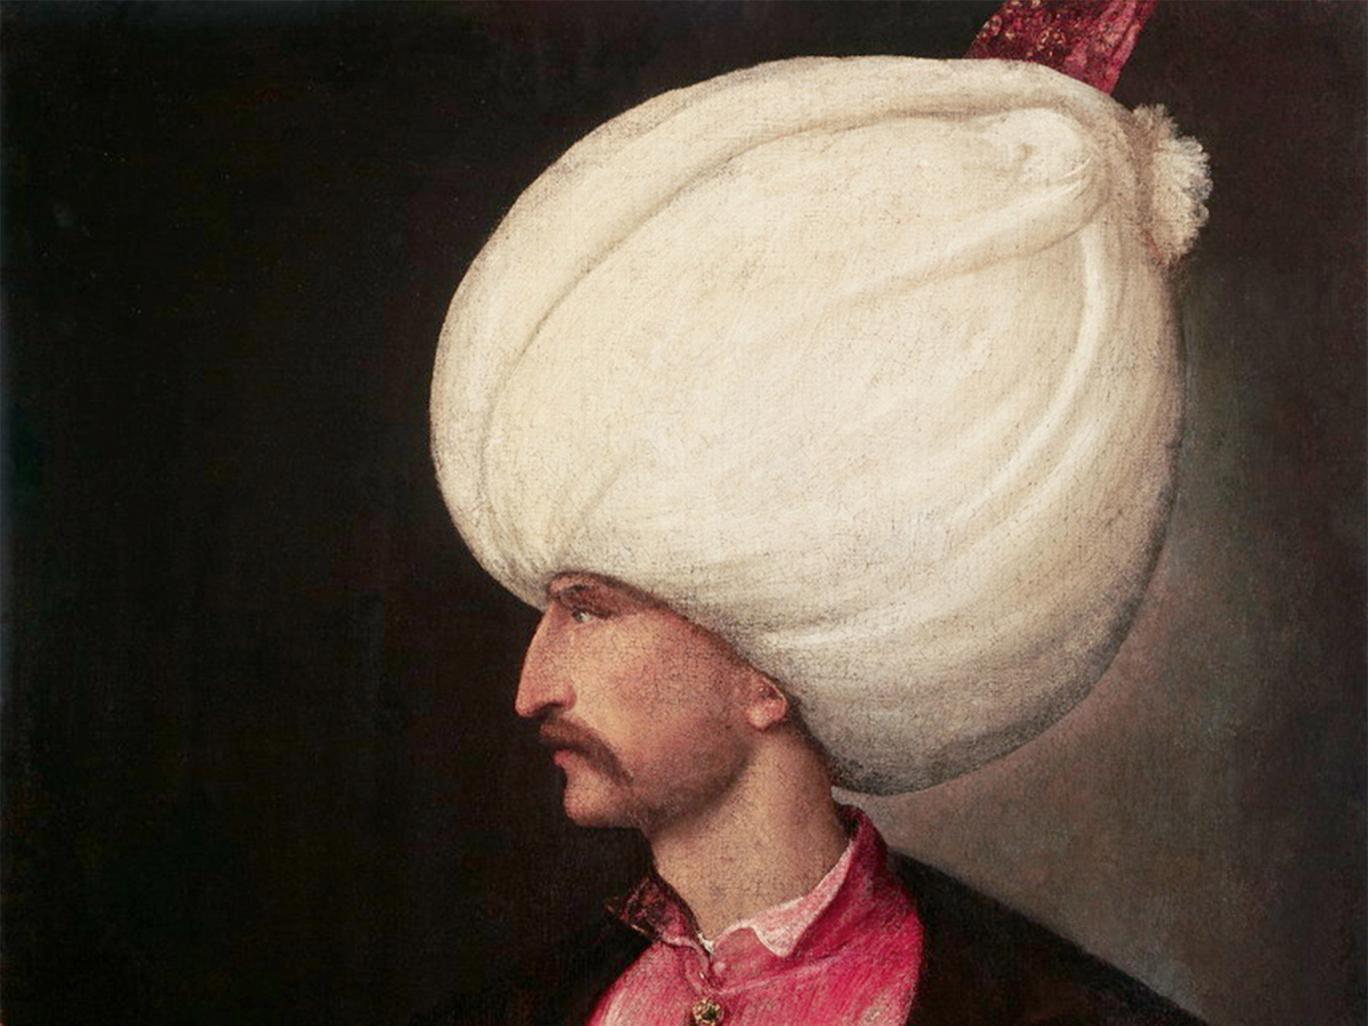  Suleiman was called The Magnificent most likely because of the size of his turban. Also, he just so happened to rule of the Ottoman Empire at its peak. He apparently didn't care about capital investment and more about cannons. 